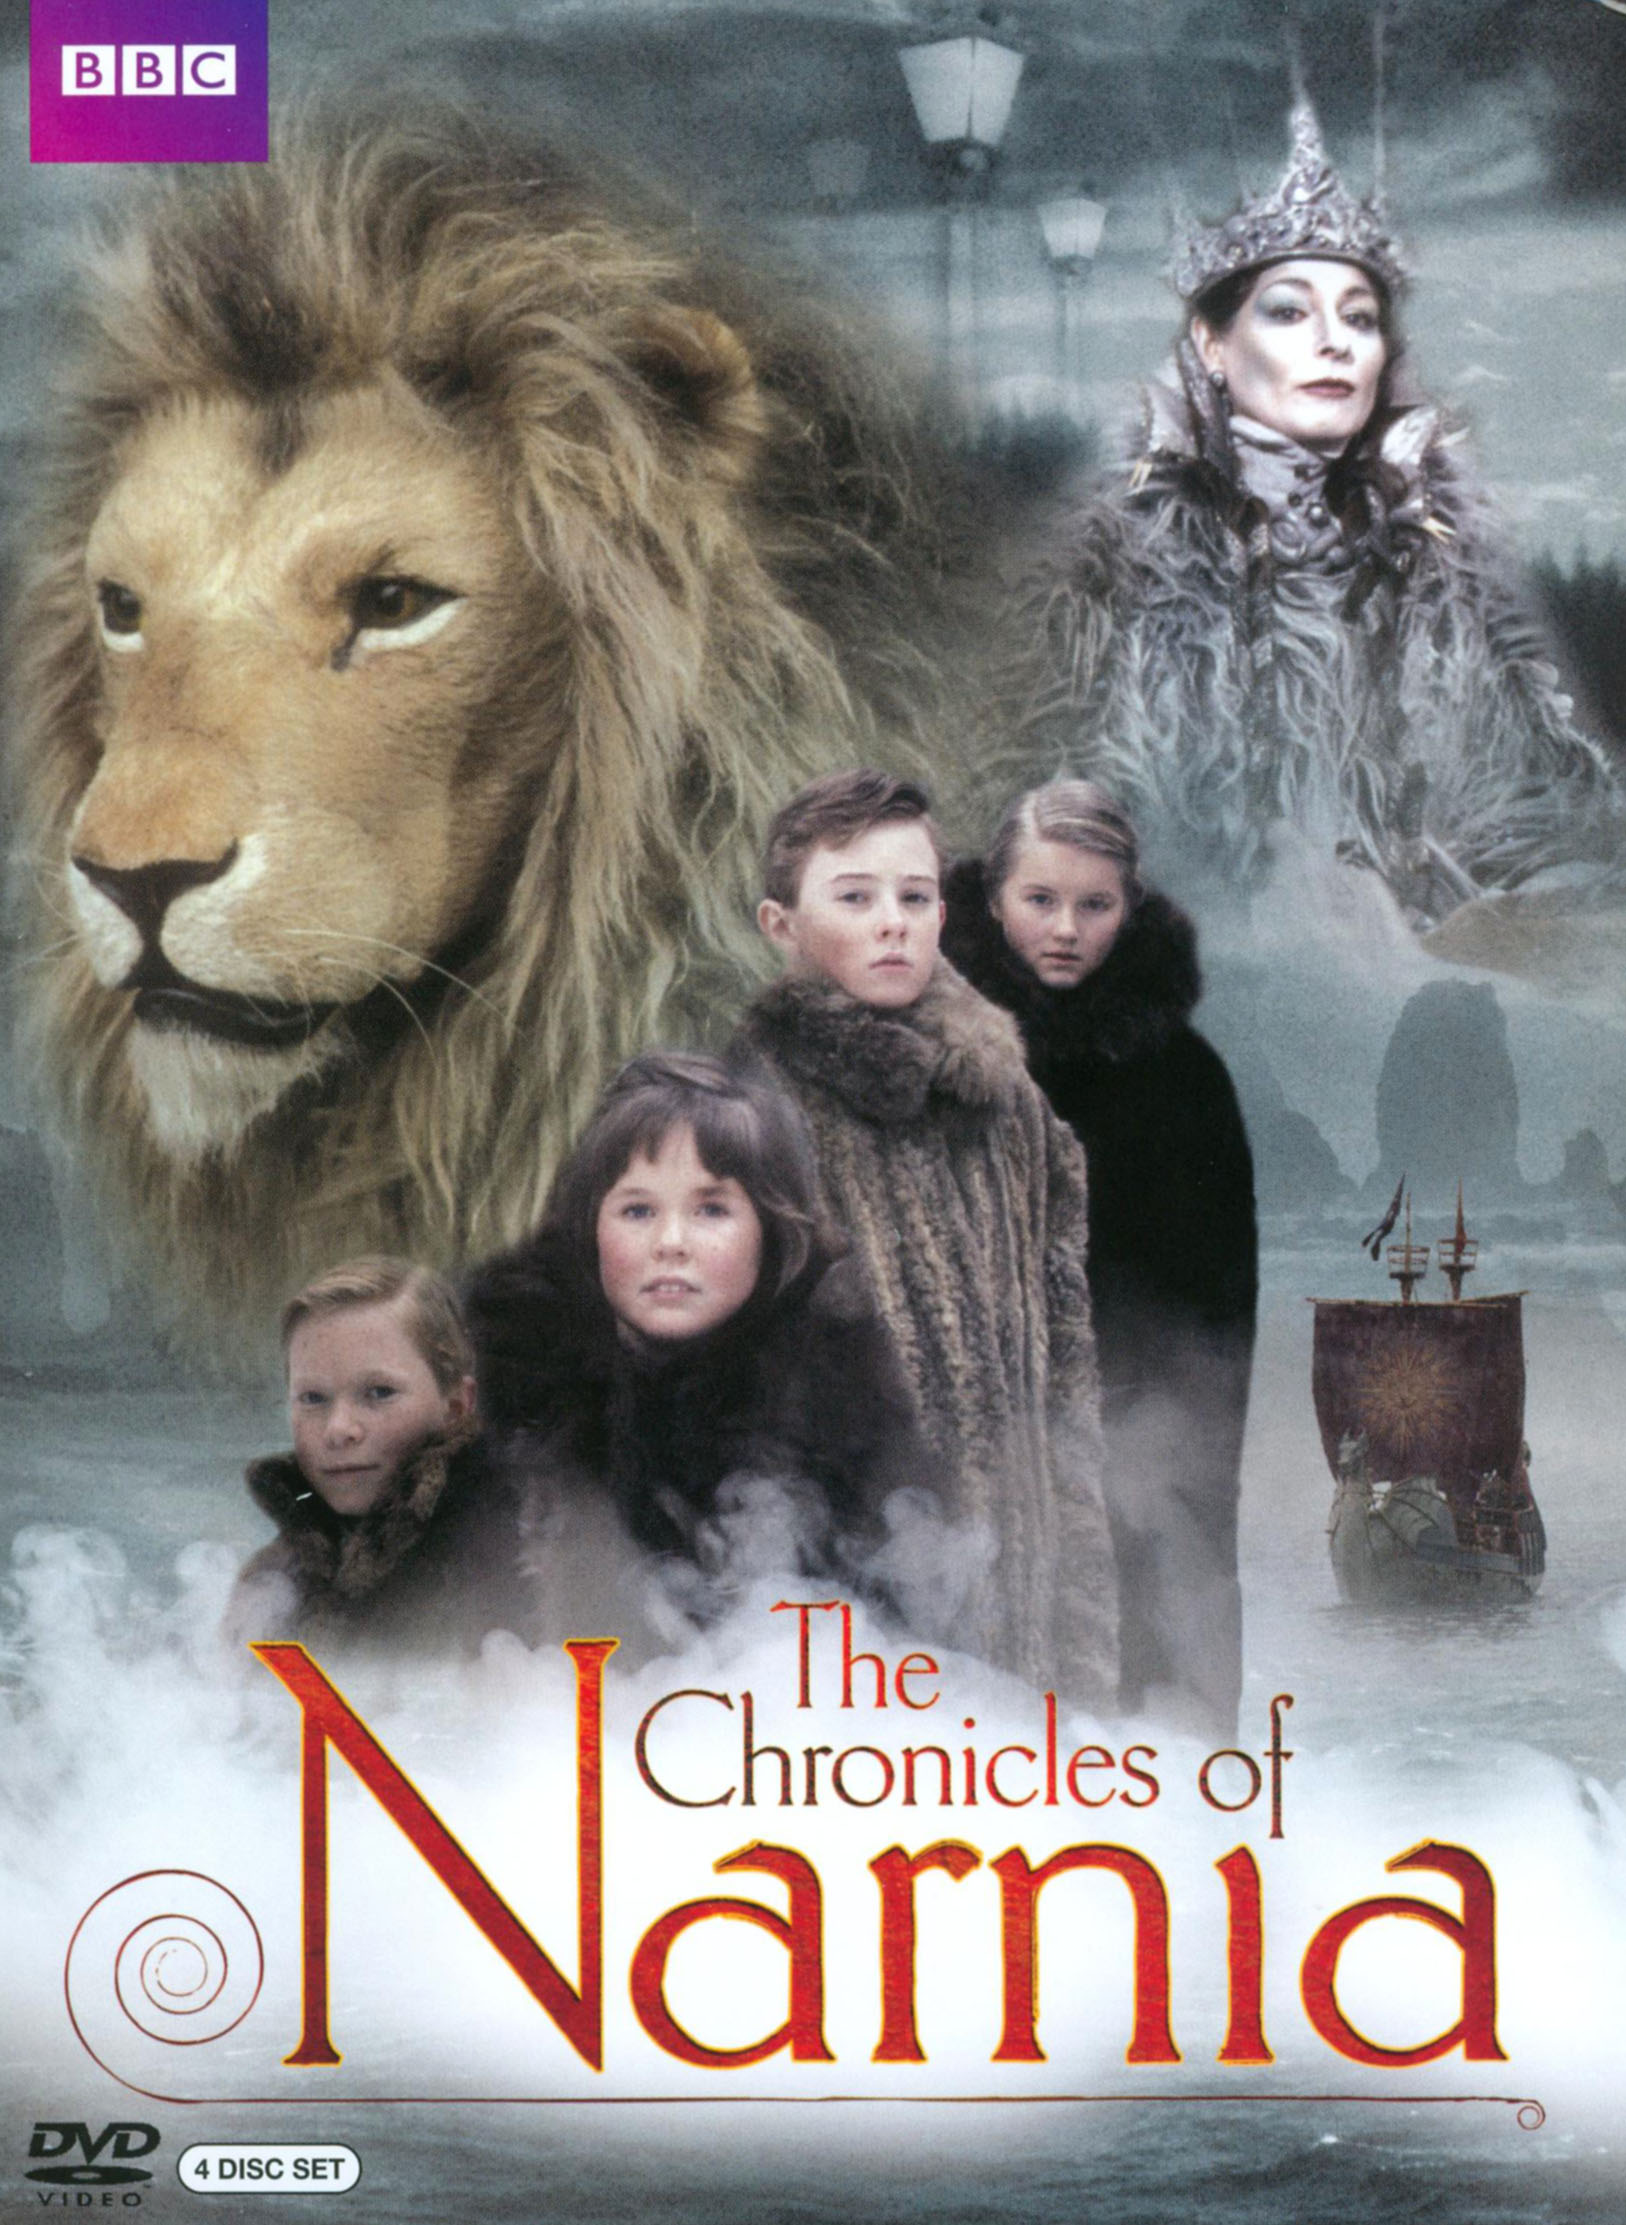 why did they only make 3 narnia movies